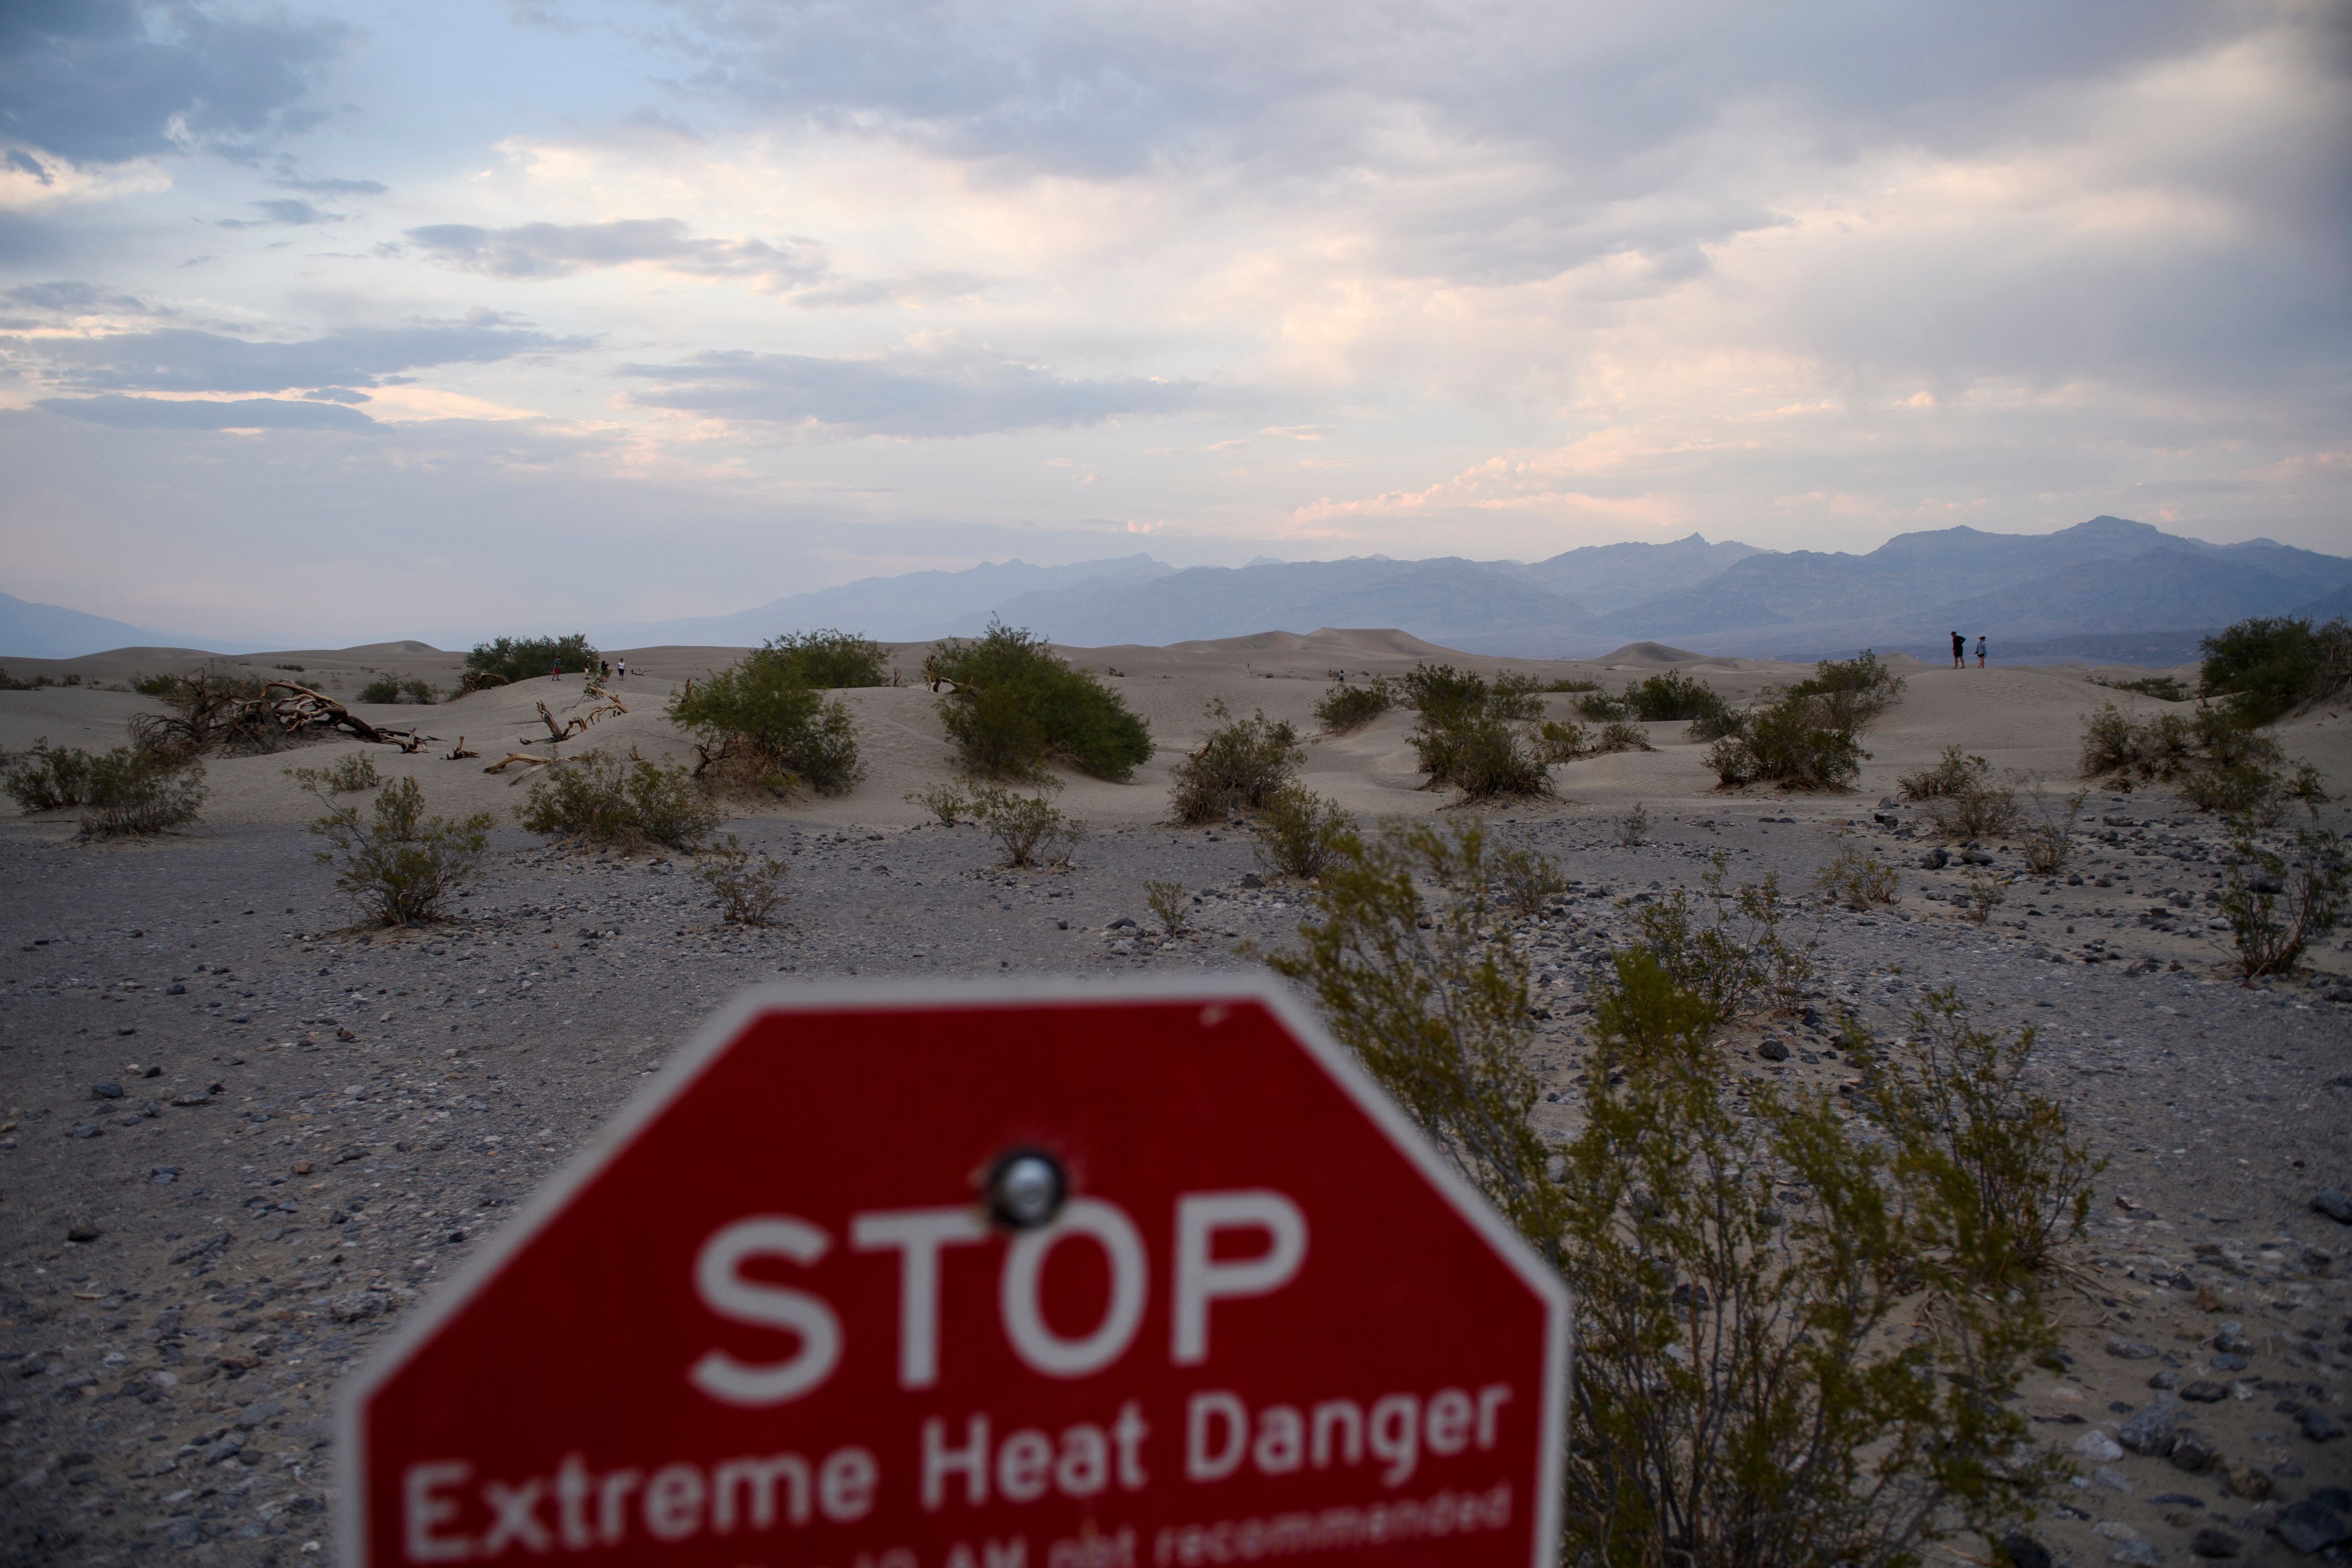 An Extreme Heat Danger sign in Death Valley, California, June 2021